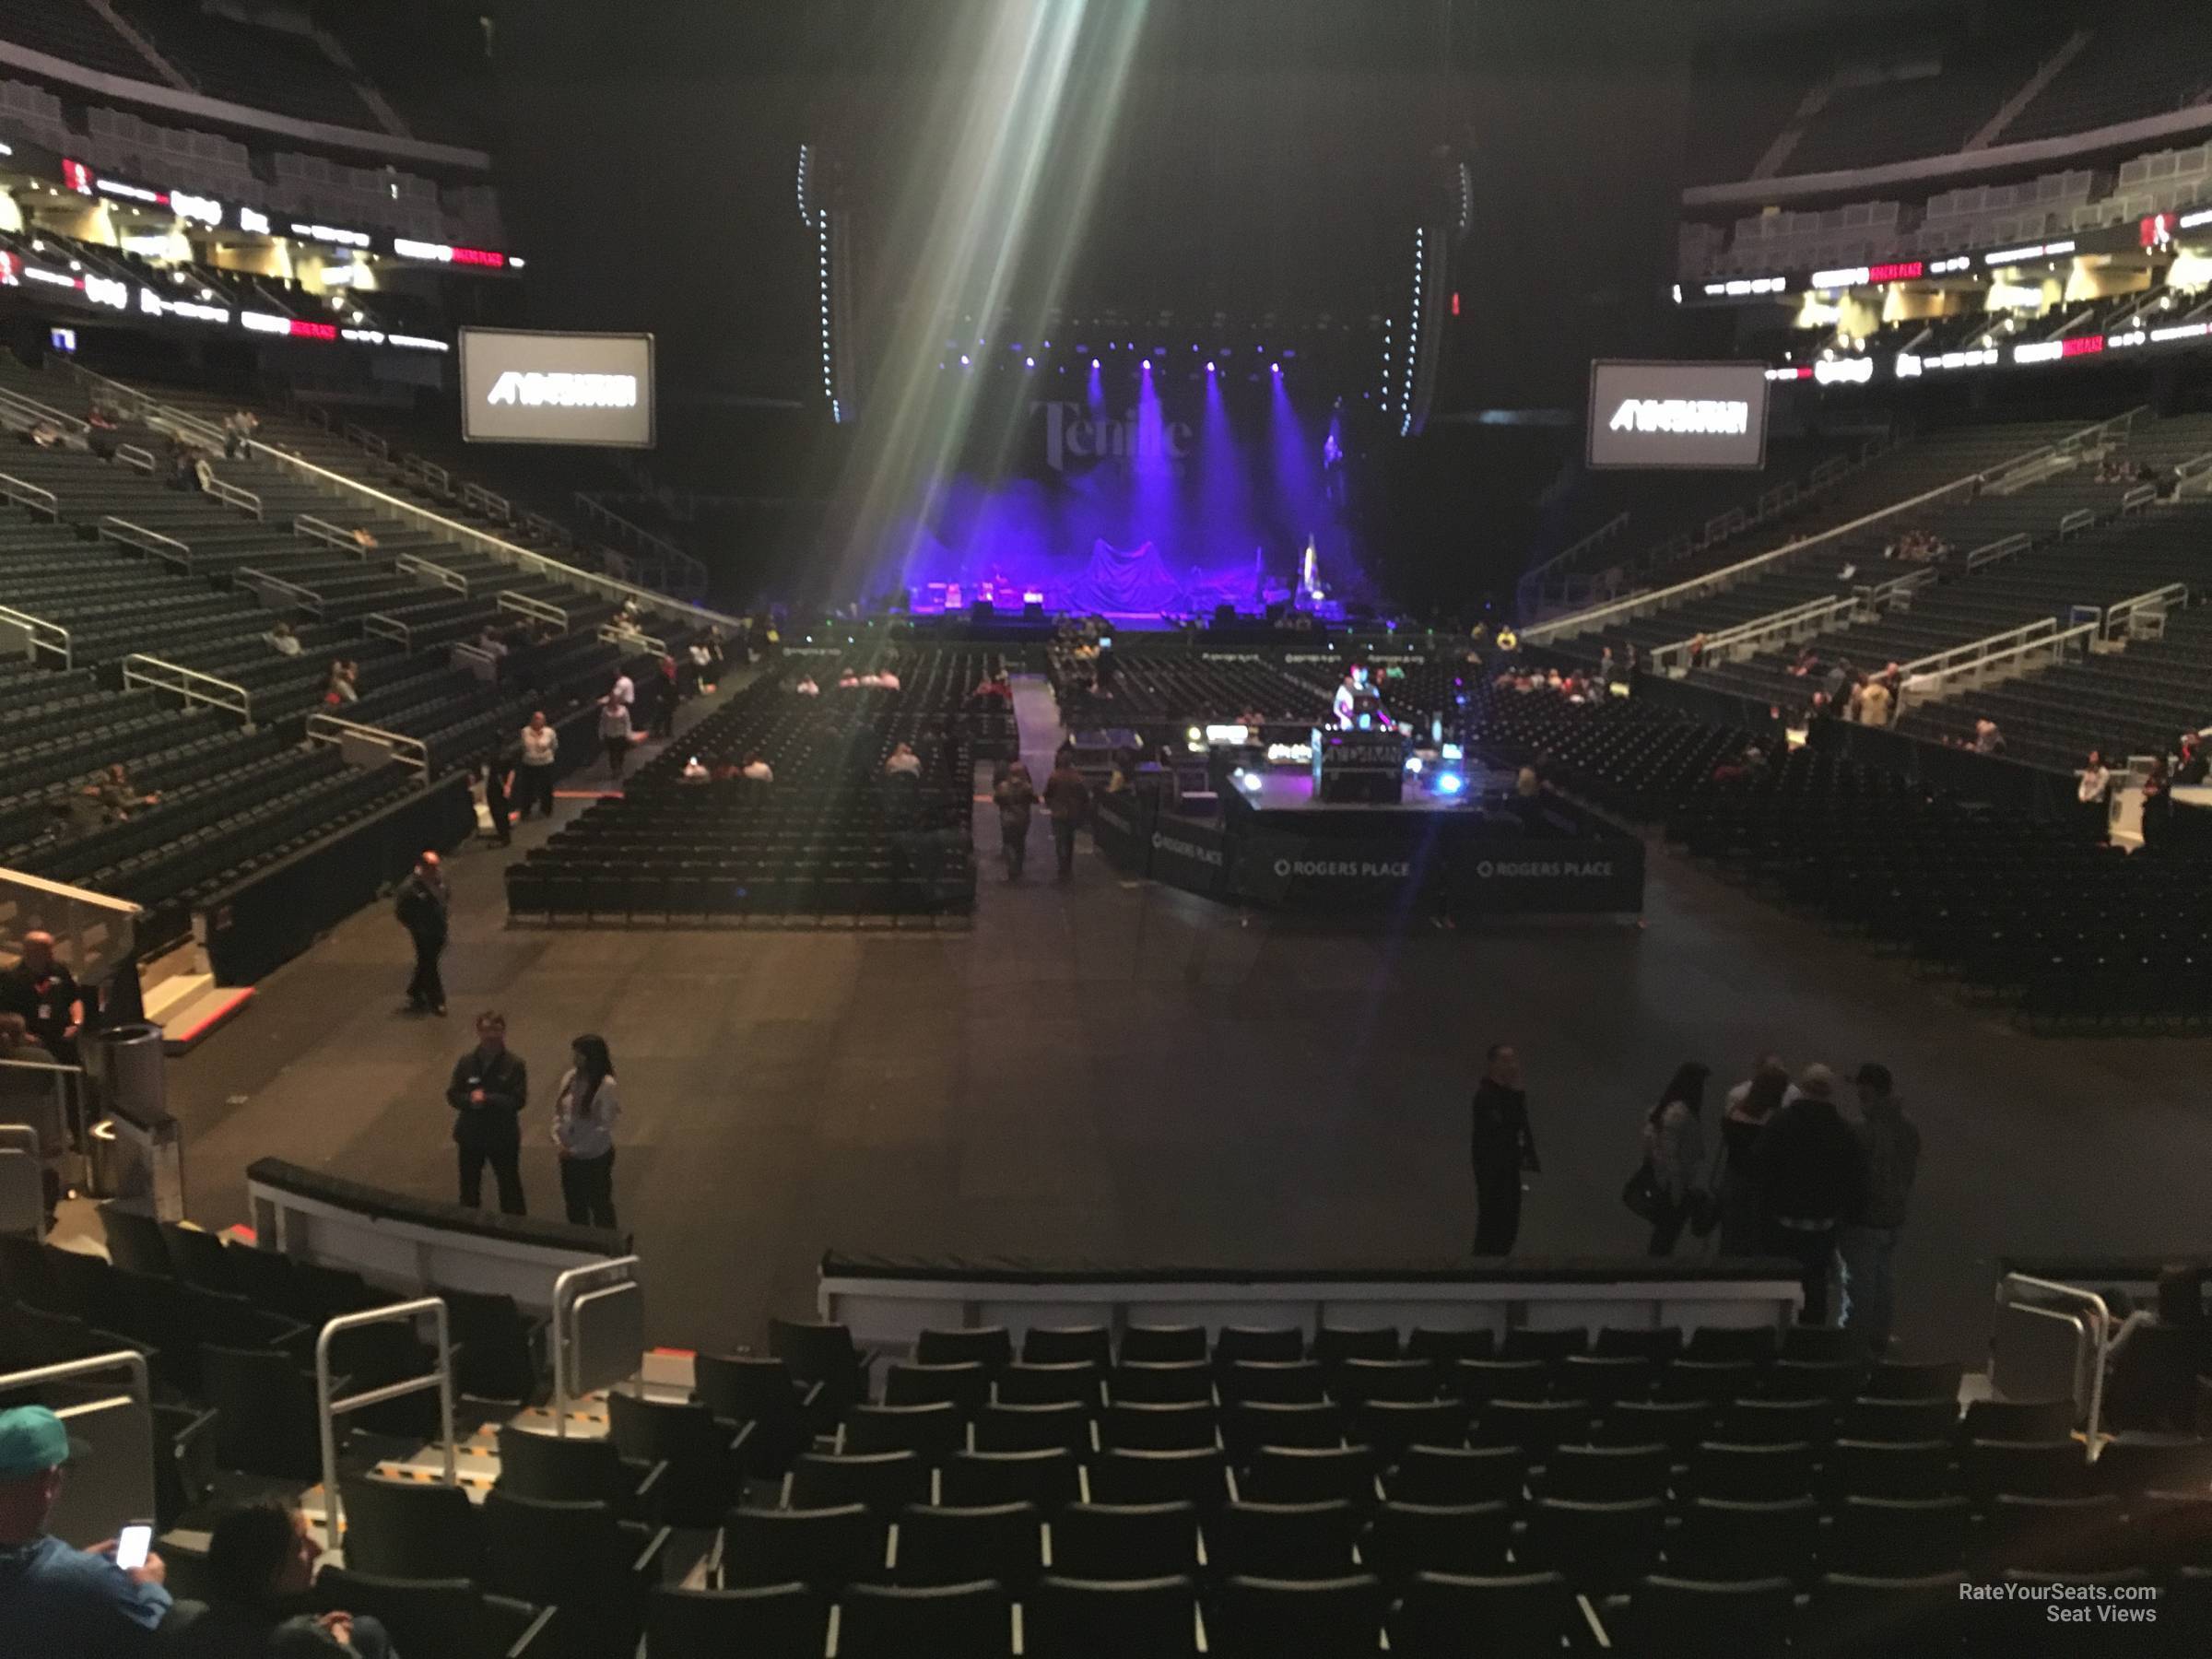 section 112, row 10 seat view  for concert - rogers place